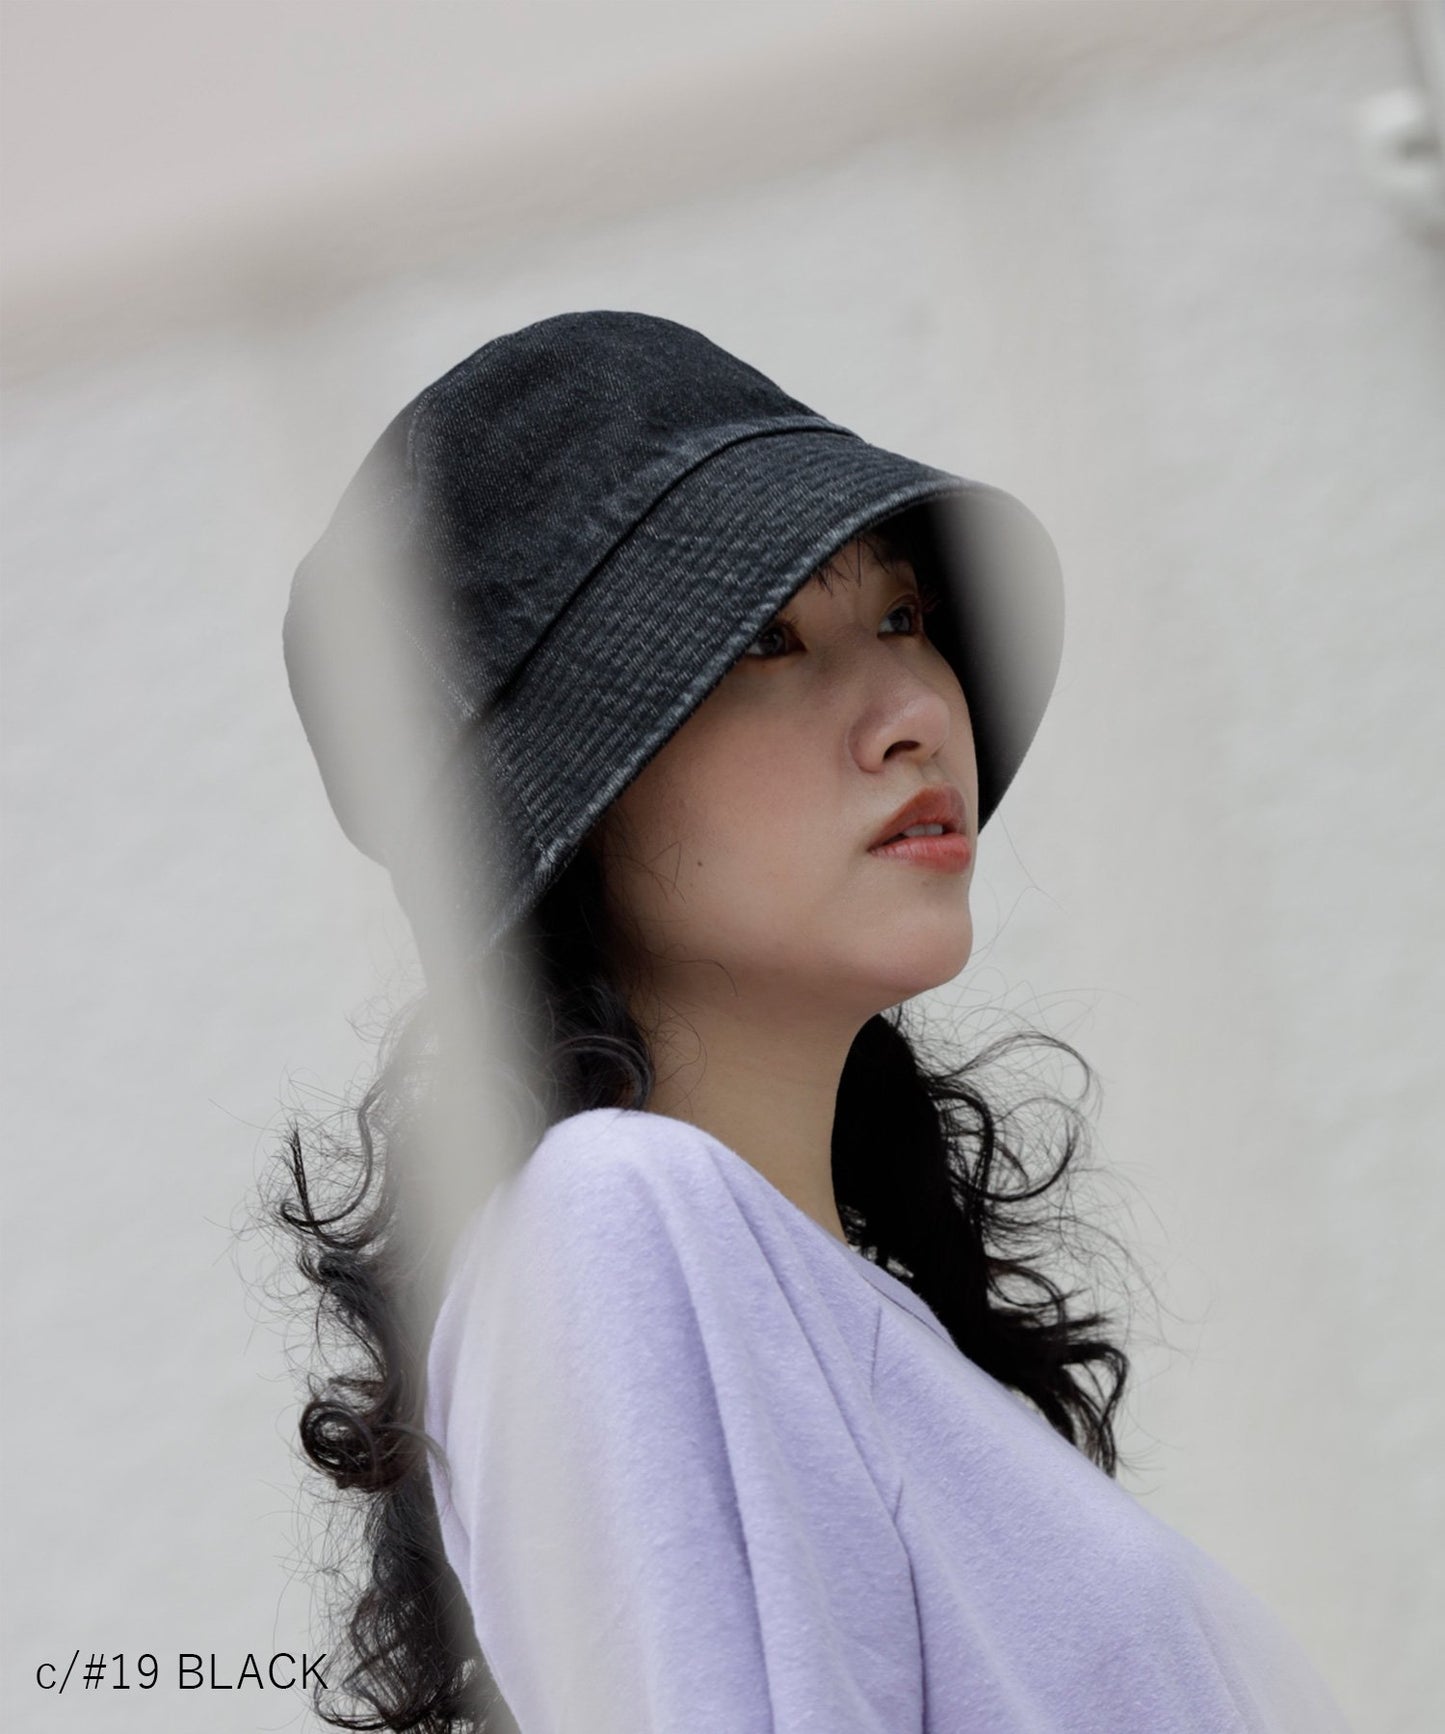 [Eco-friendly material] OG DENIM BUCKET HAT Organic cotton Year-round material [Head circumference 48-60cm]